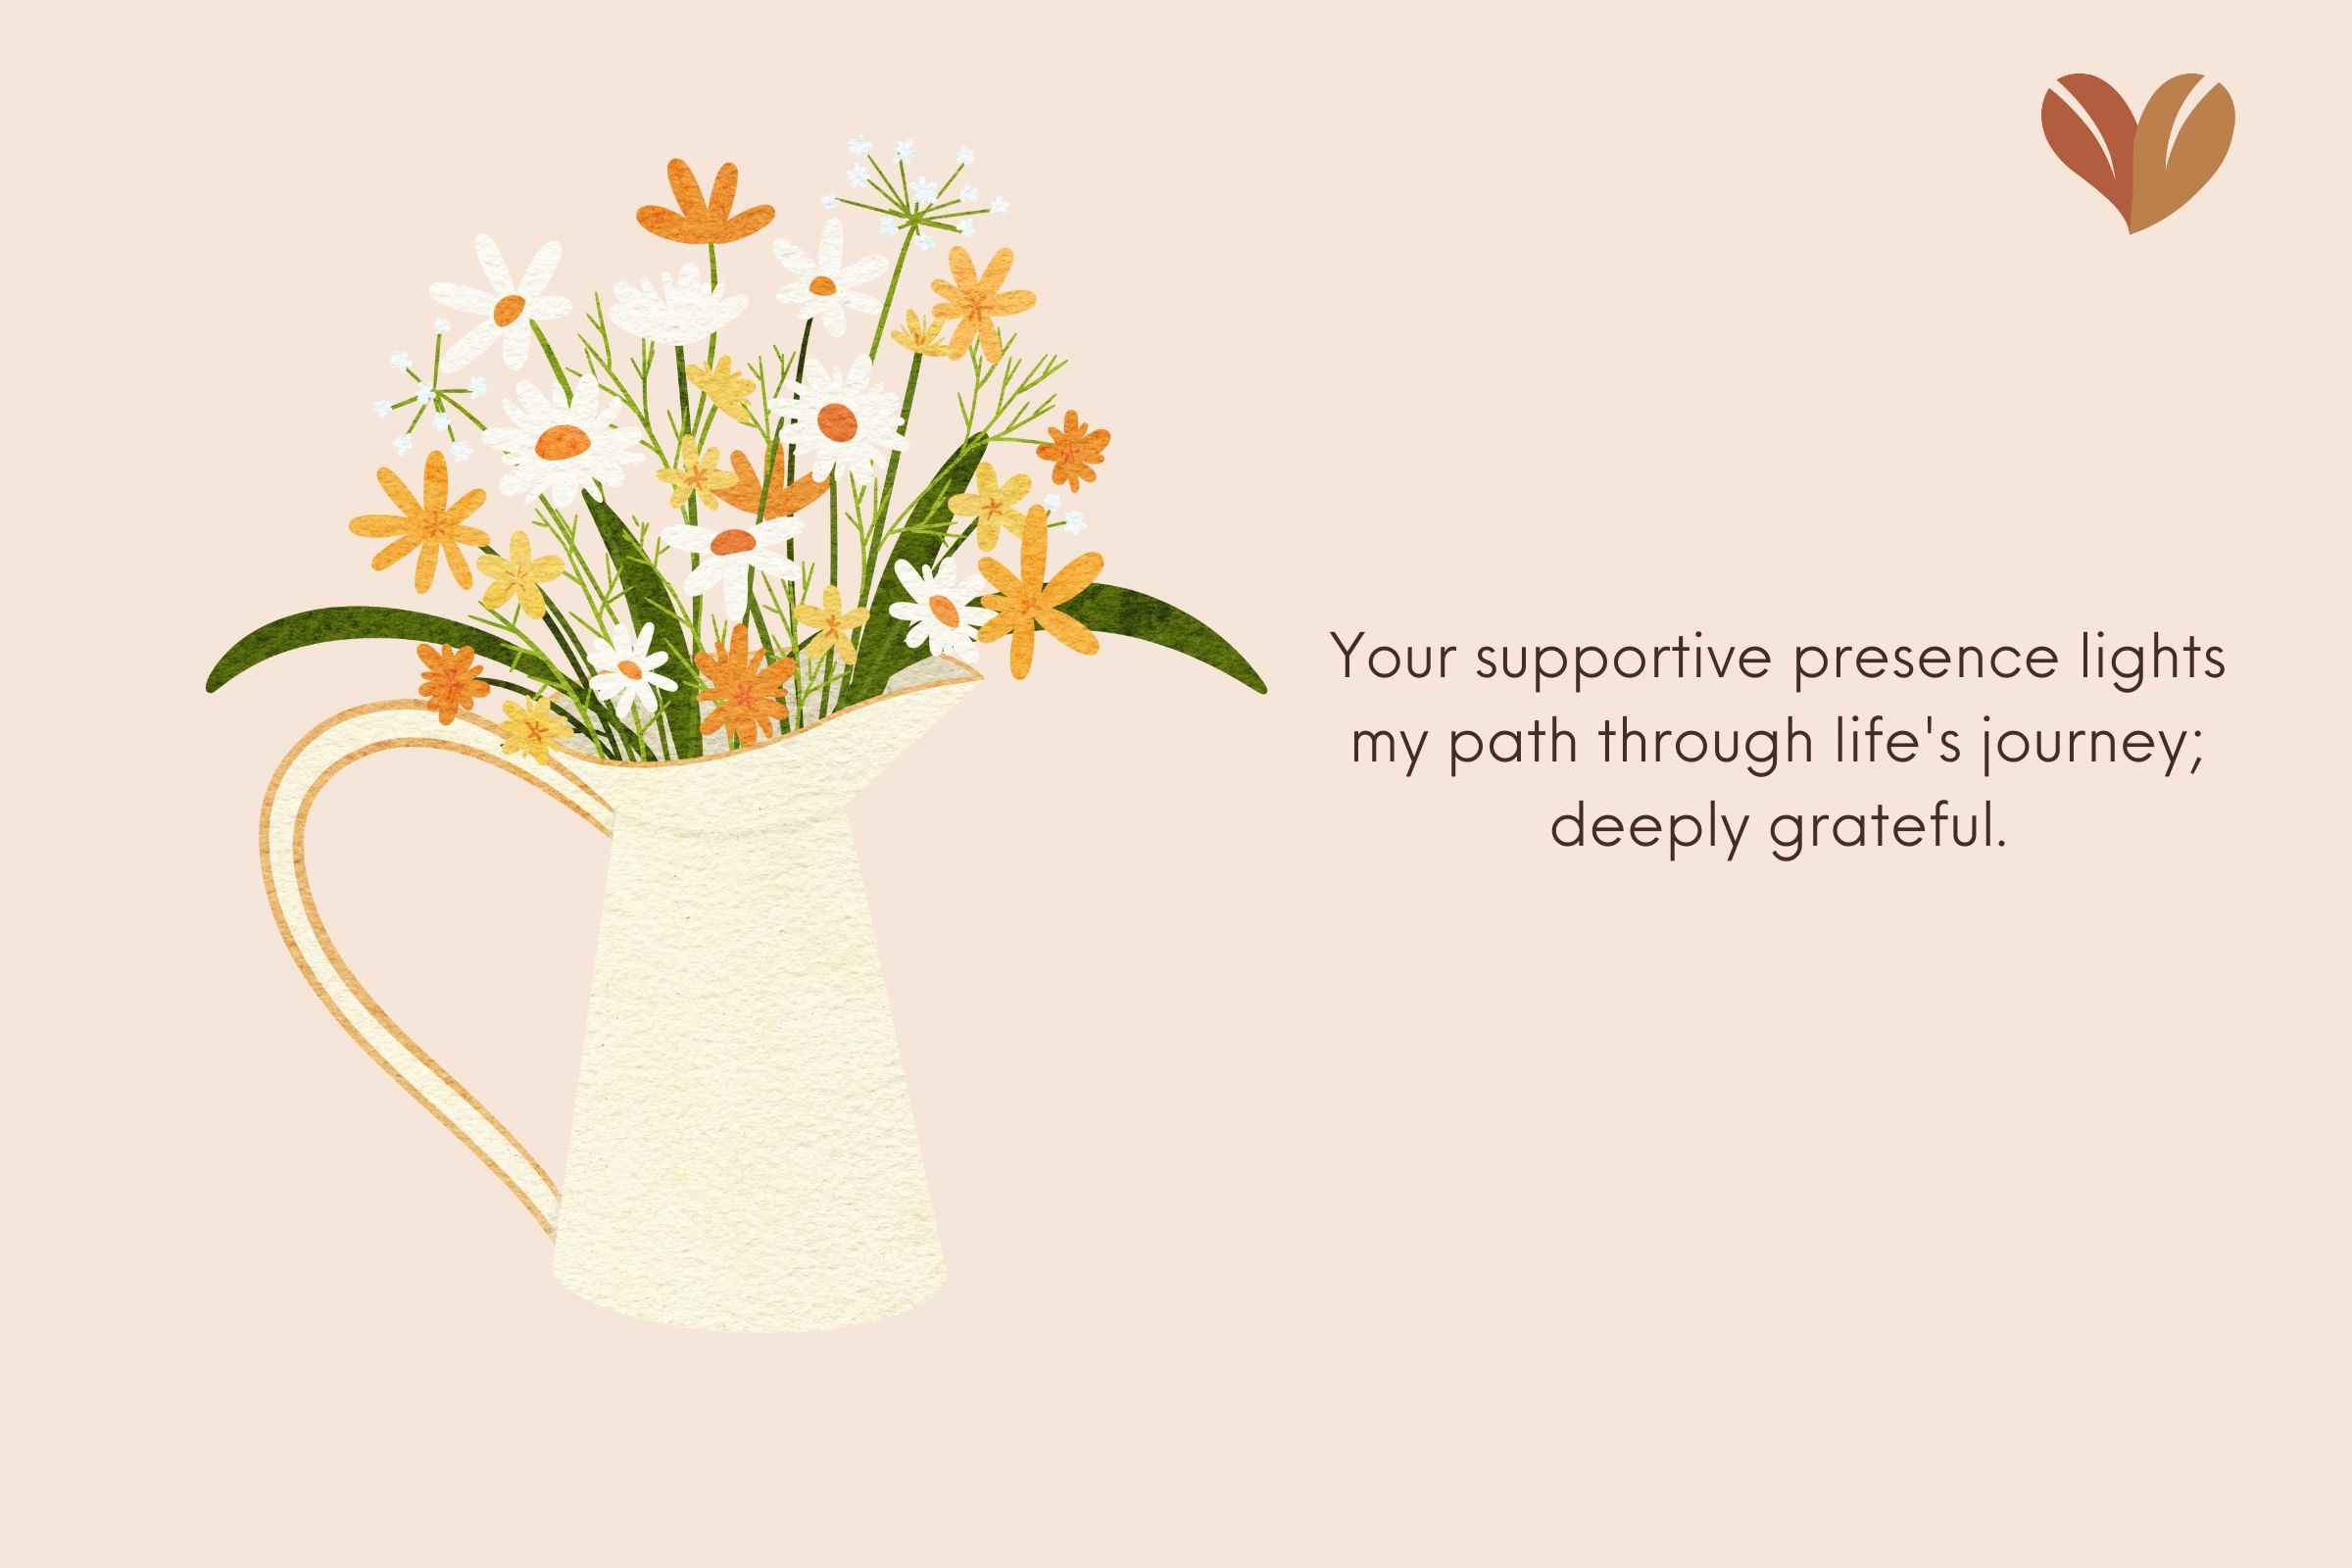 Thank You Messages for Mother in Law: Your supportive presence lights my path through life's journey; deeply grateful.